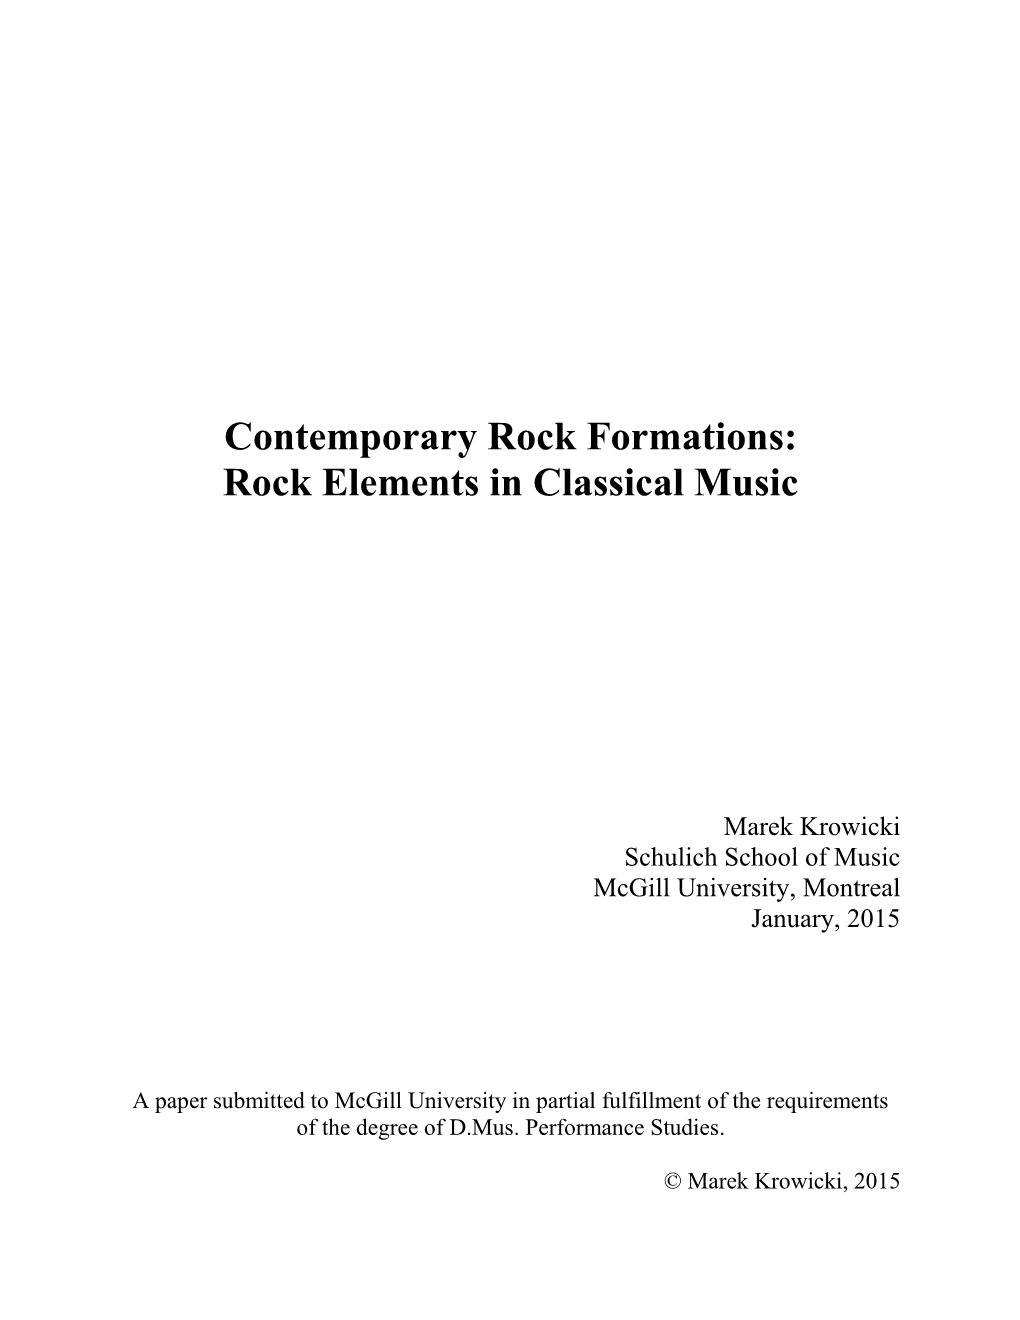 Contemporary Rock Formations: Rock Elements in Classical Music